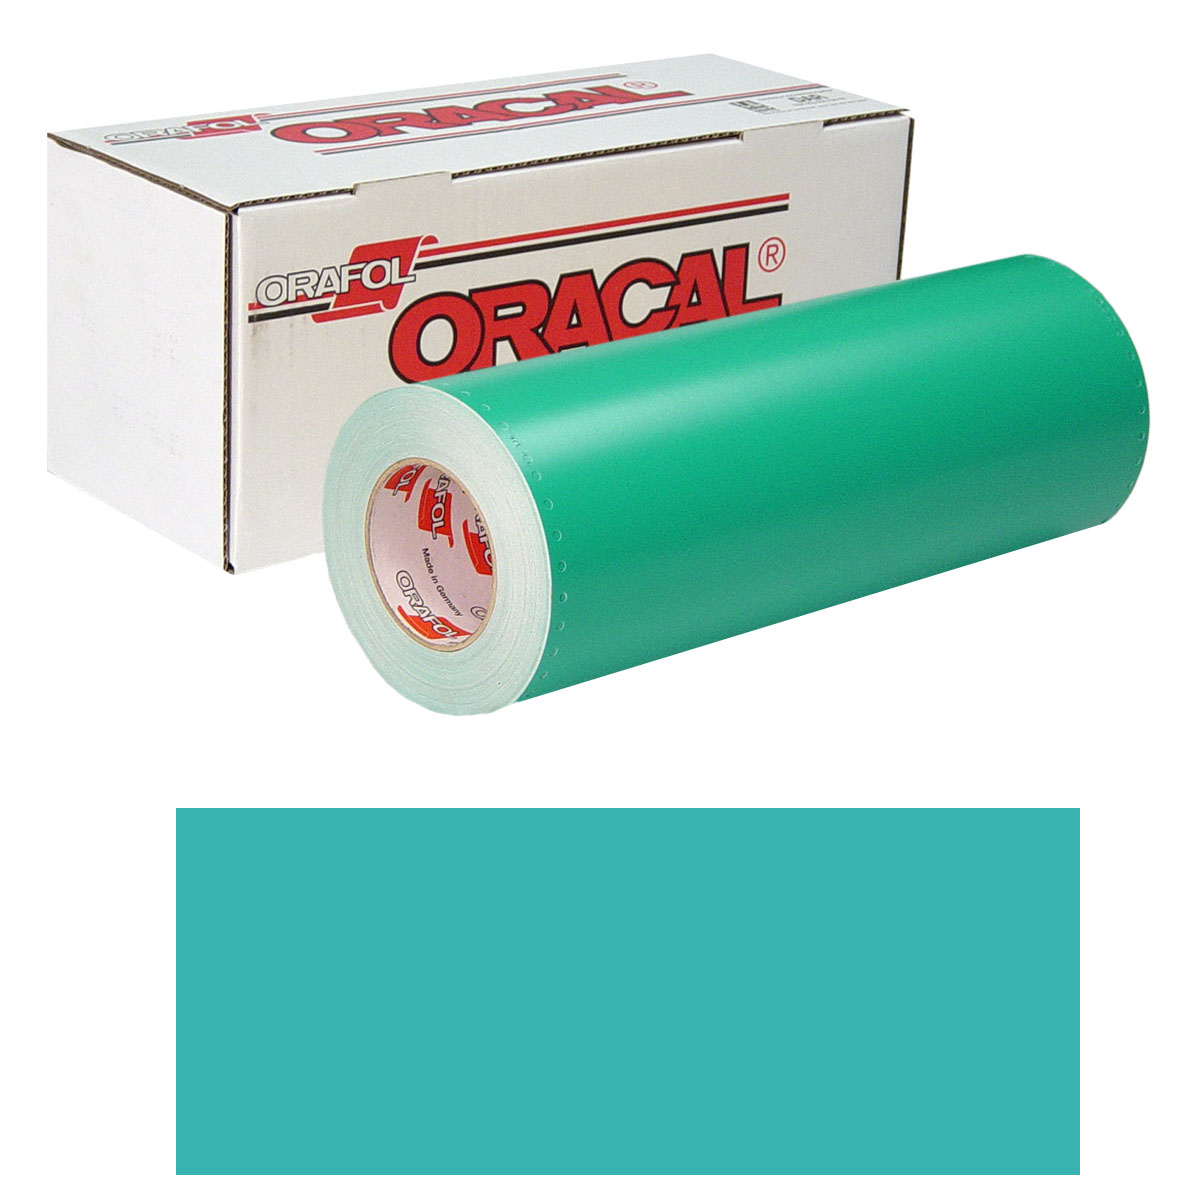 ORACAL 8500 Unp 24in X 10yd 054 Turquoise